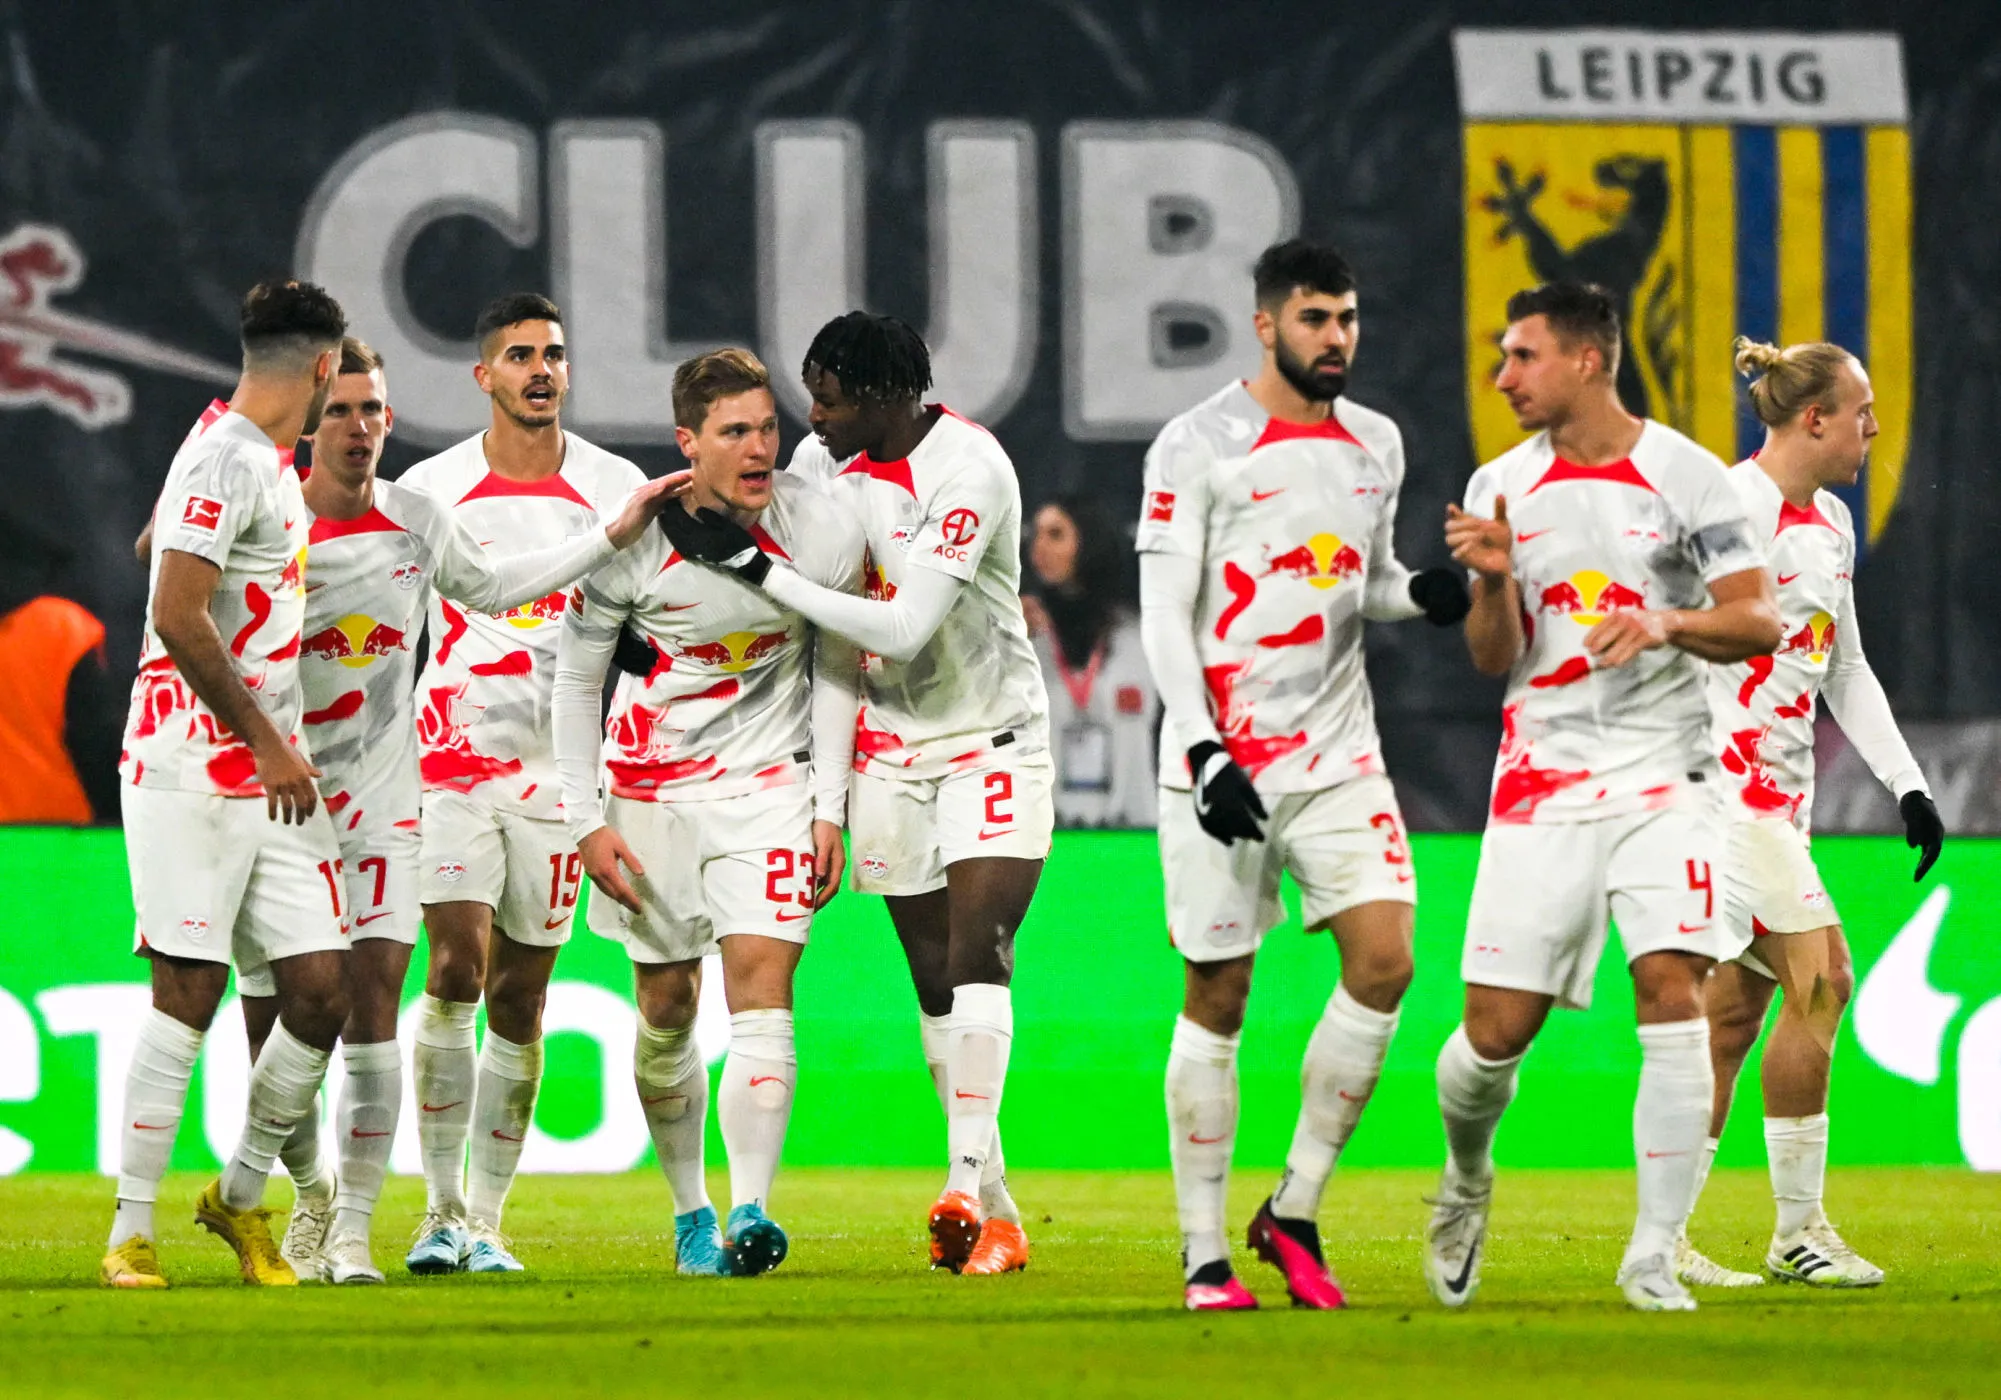 20 January 2023, Saxony, Leipzig: Soccer, Bundesliga, RB Leipzig - FC Bayern München, Matchday 16, Red Bull Arena. Munich's Marcel Halstenberg (4th from left) celebrates his goal to make it 1:1. IMPORTANT NOTE: In accordance with the regulations of the DFL Deutsche Fußball Liga and the DFB Deutscher Fußball-Bund, it is prohibited to use or have used photographs taken in the stadium and/or of the match in the form of sequence pictures and/or video-like photo series. Photo: Hendrik Schmidt/dpa - Photo by Icon sport